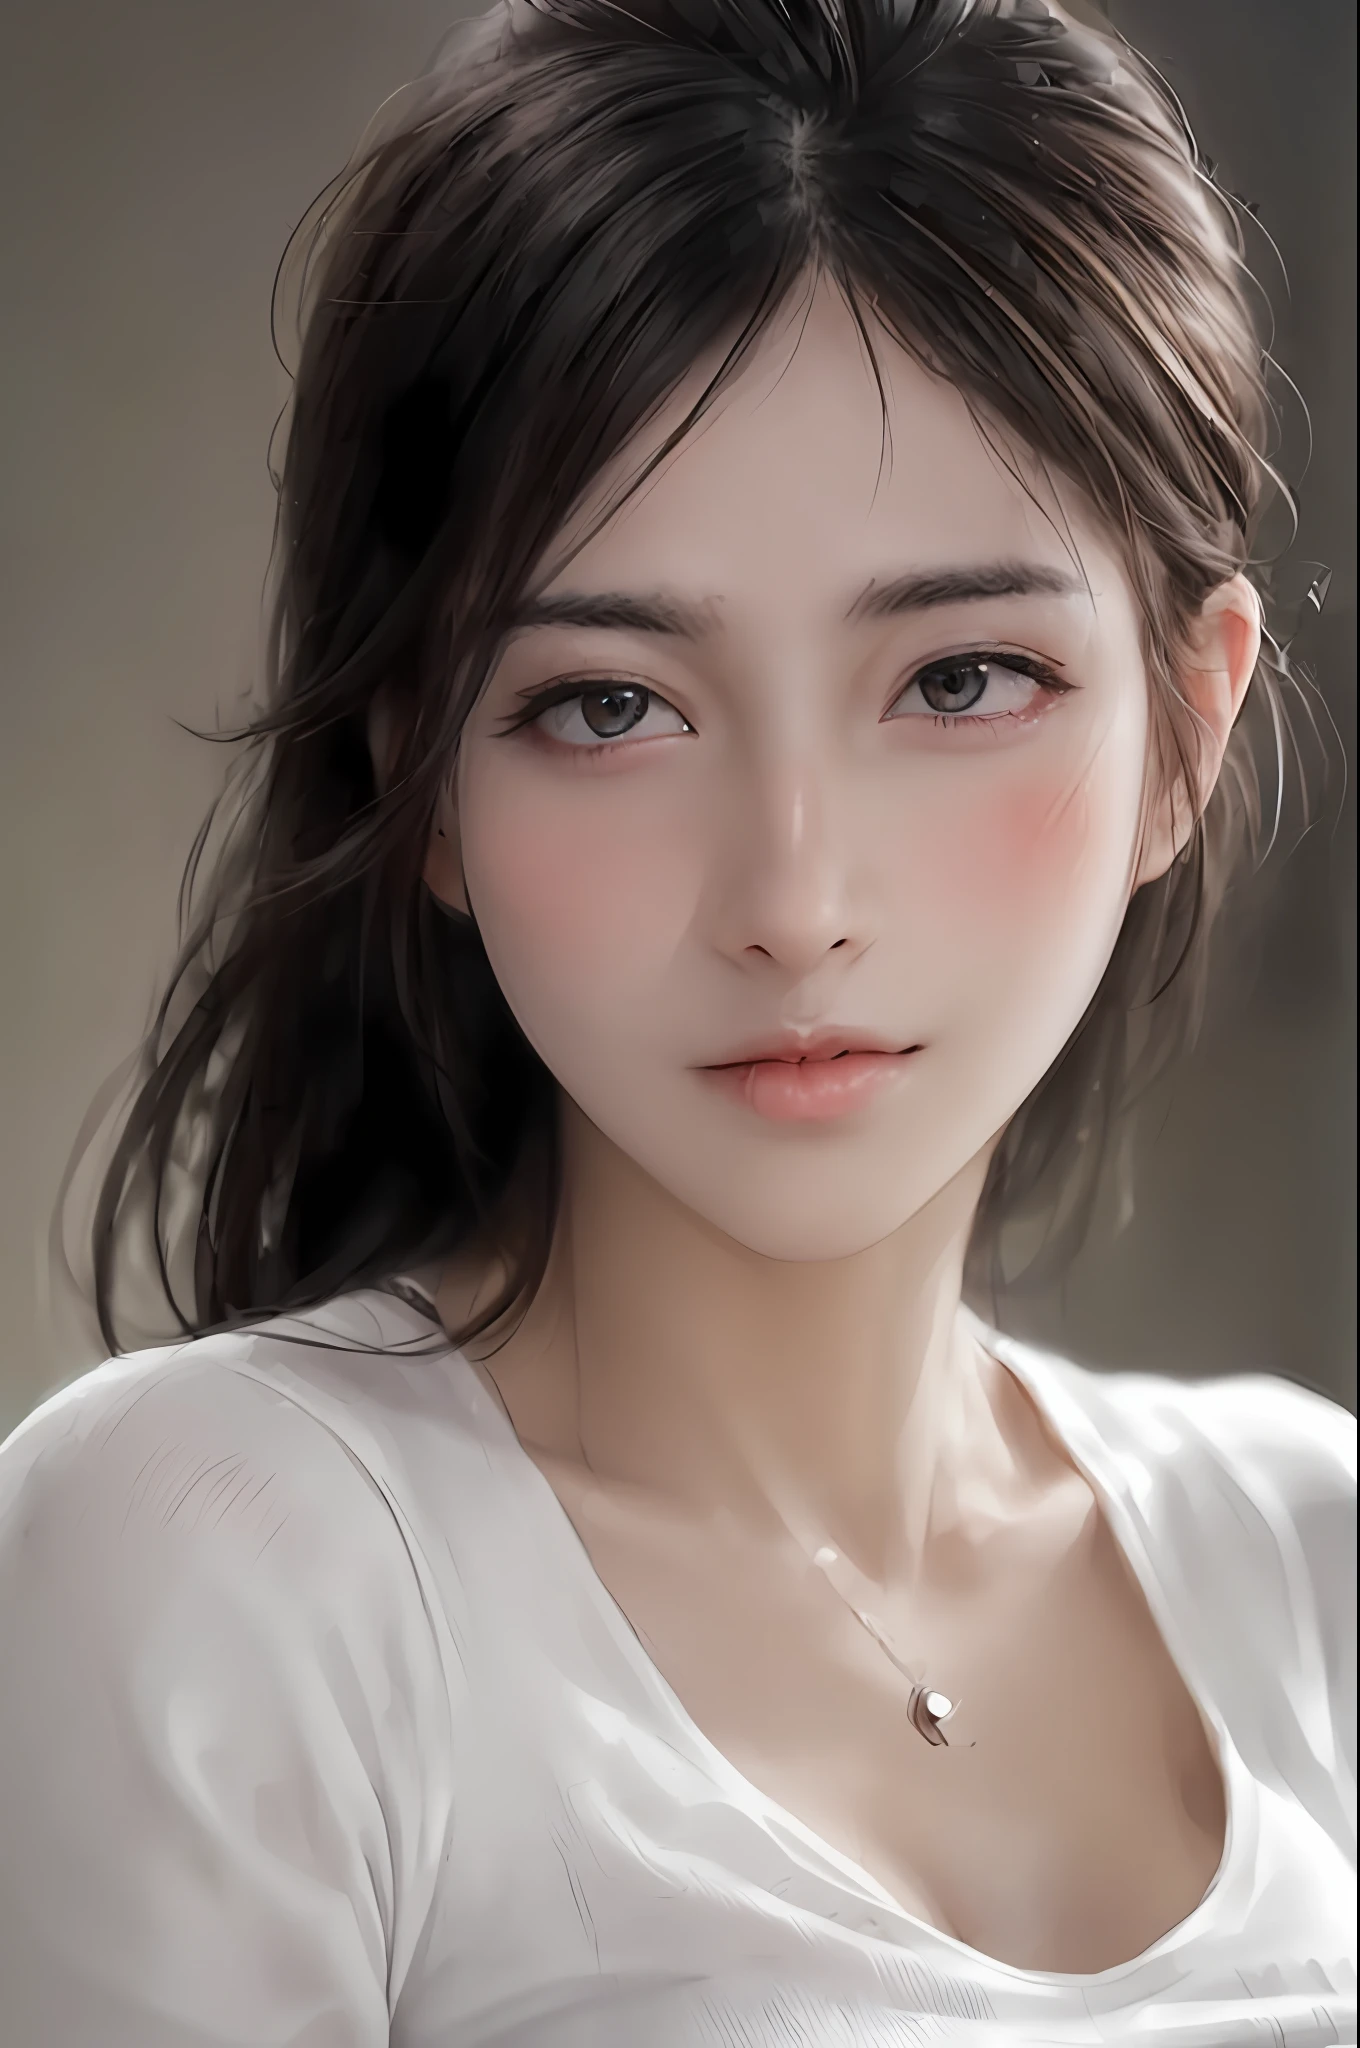 dressed, (photo realistic:1.4), (hyper realistic:1.4), (realistic:1.3),
(smoother lighting:1.05), (increase cinematic lighting quality:0.9), 32K,
1girl,20yo girl, realistic lighting, backlighting, light on face, ray trace, (brightening light:1.2), (Increase quality:1.4),
(best quality real texture skin:1.4), finely detailed eyes, finely detailed face, finely quality eyes,
(joy, blush), (tired and sleepy and satisfied), face closeup, t-shirts,
(Increase body line mood:1.1), (Increase skin texture beauty:1.1)